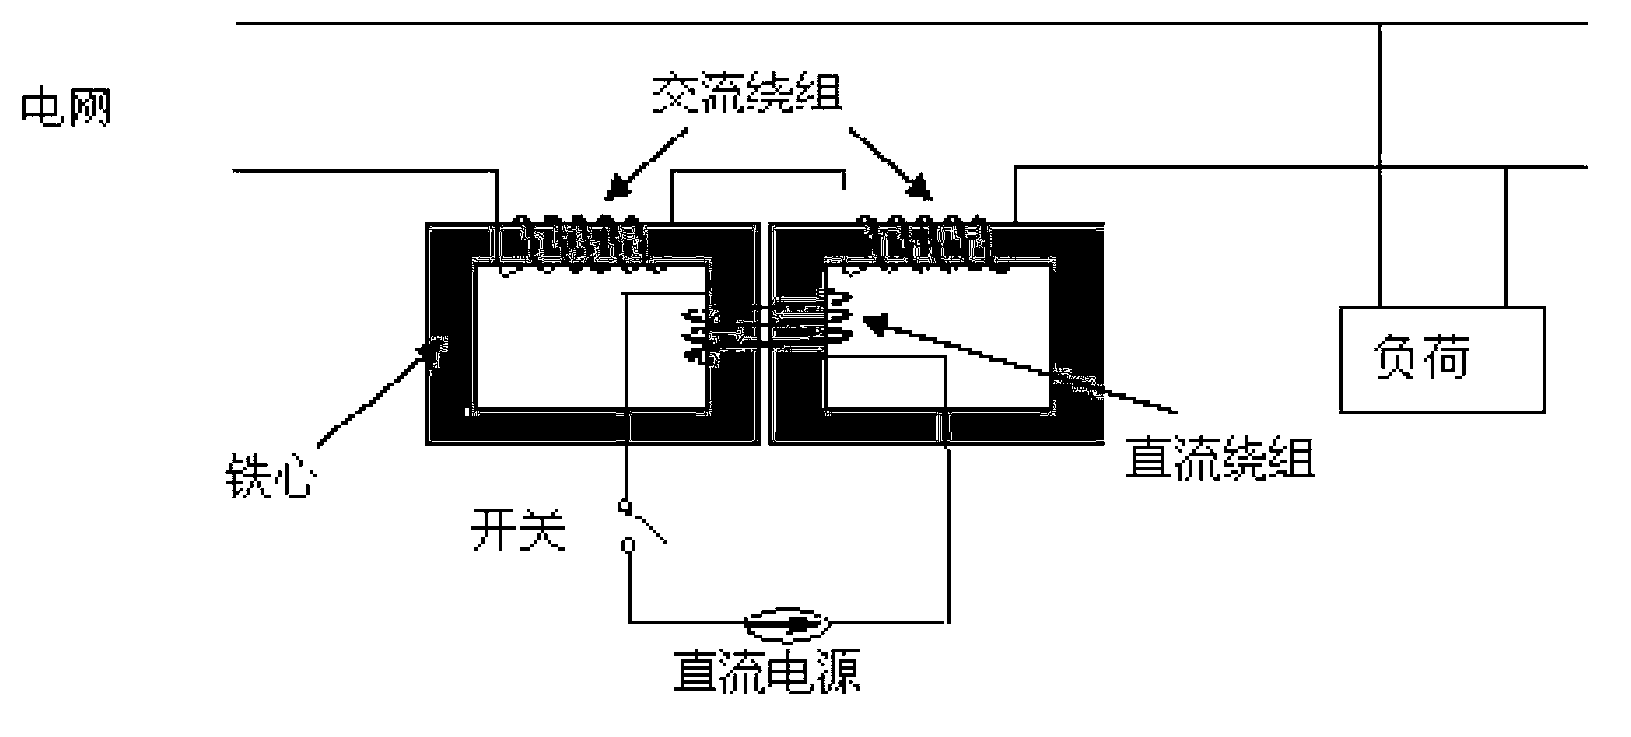 PSCAD (power system computer aided design) model of superconductive current-limiting reactor